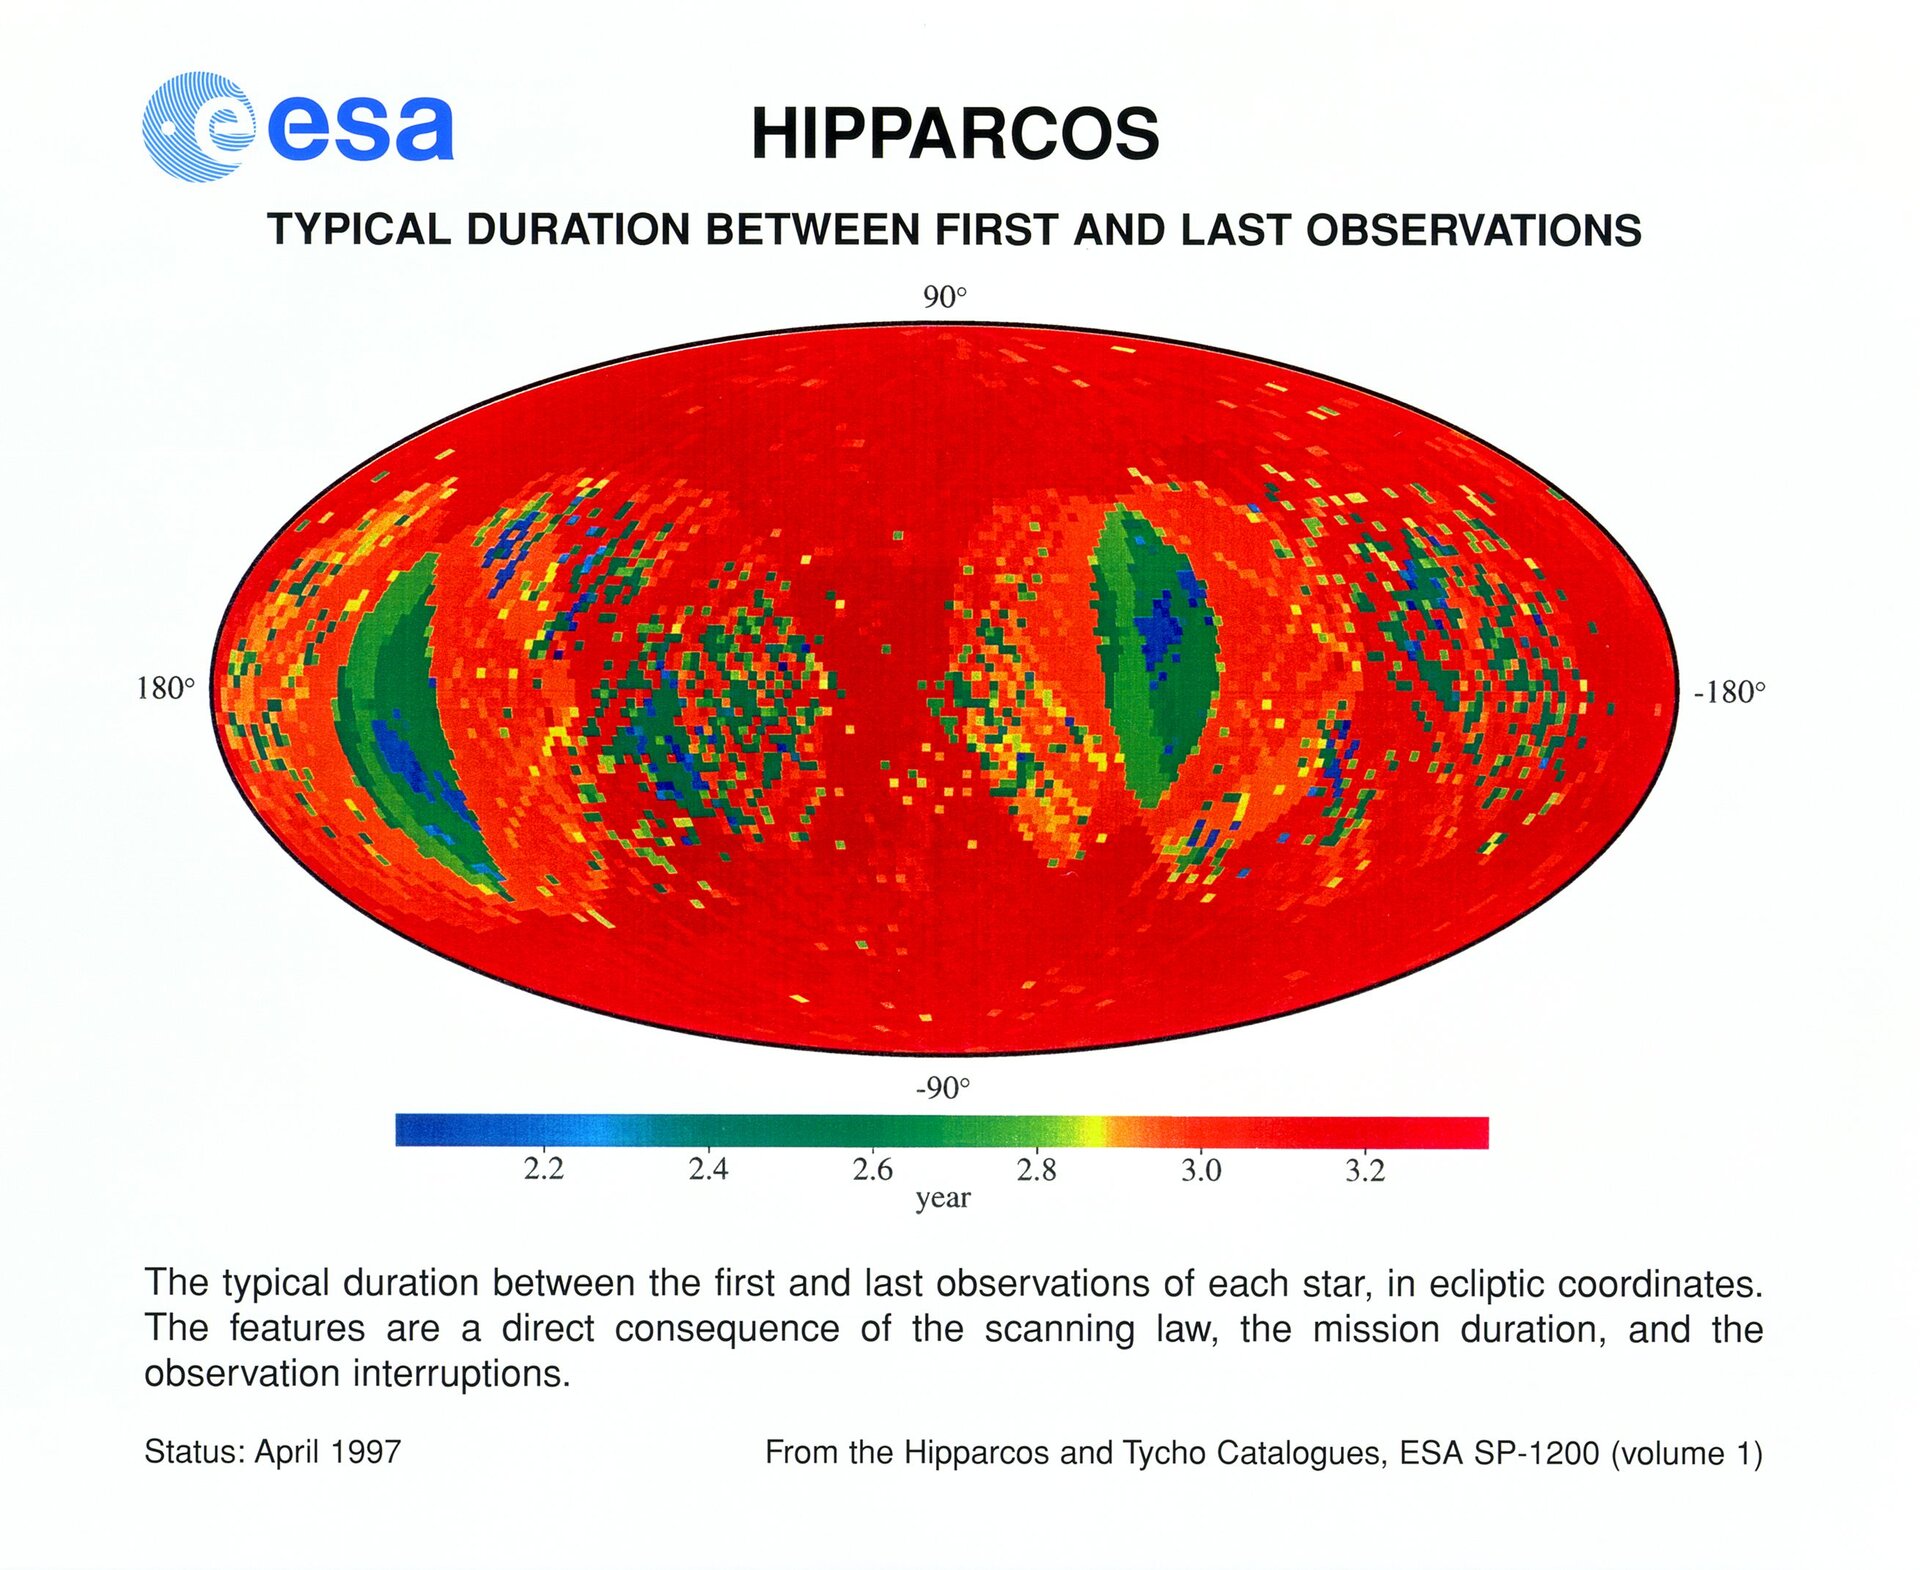 Hipparcos result - typical duration between first and last observations